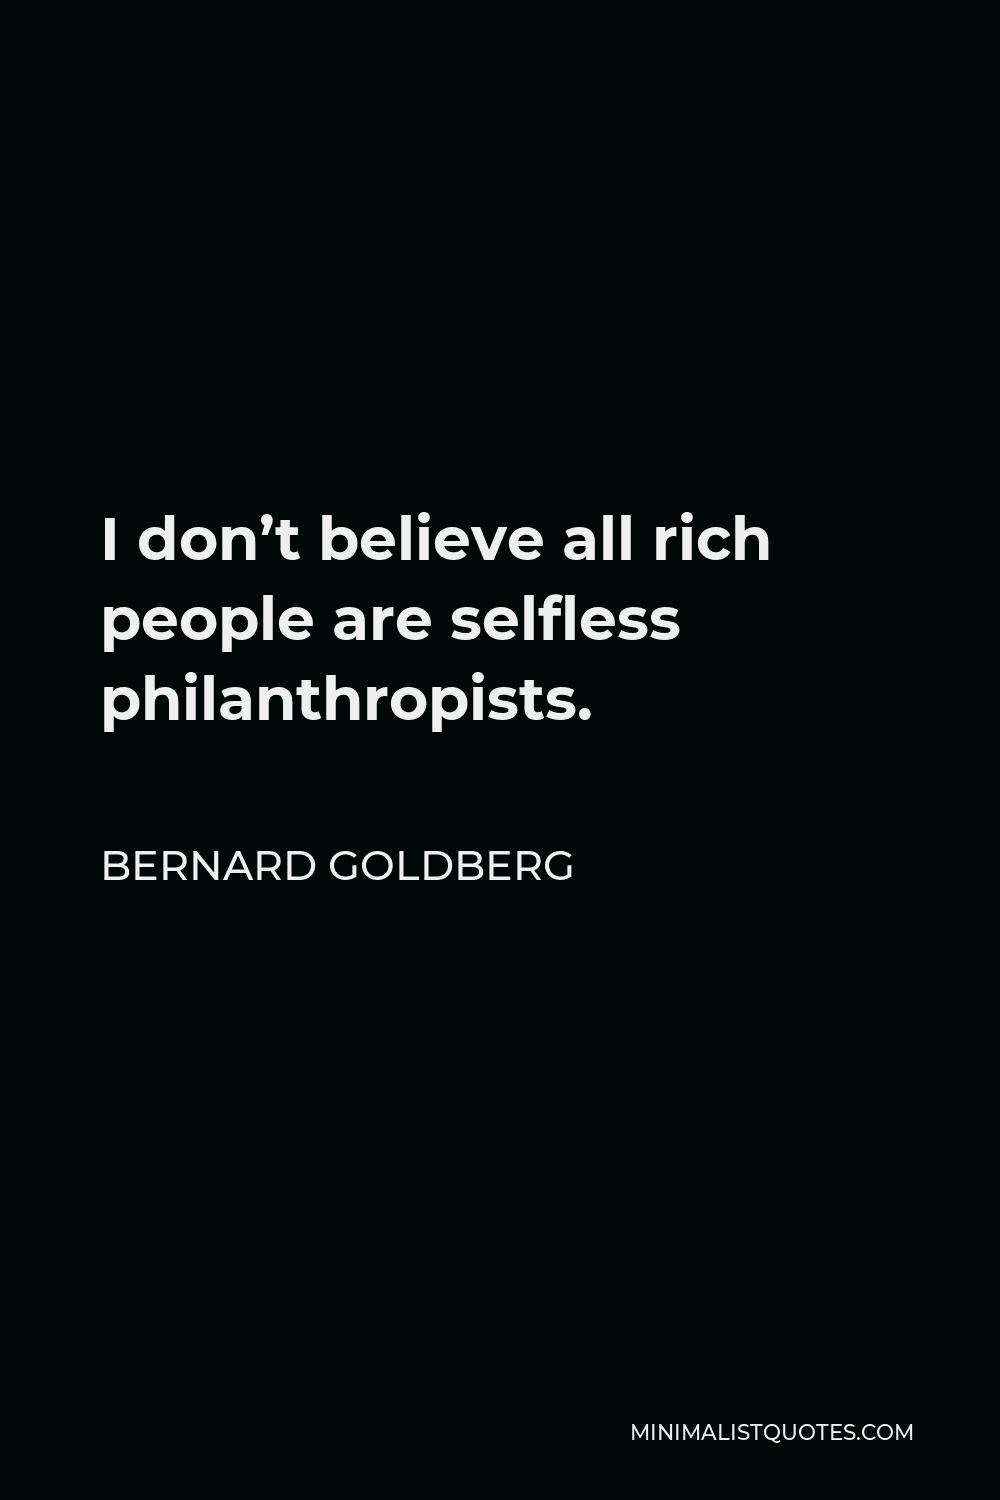 Bernard Goldberg Quote - I don’t believe all rich people are selfless philanthropists.